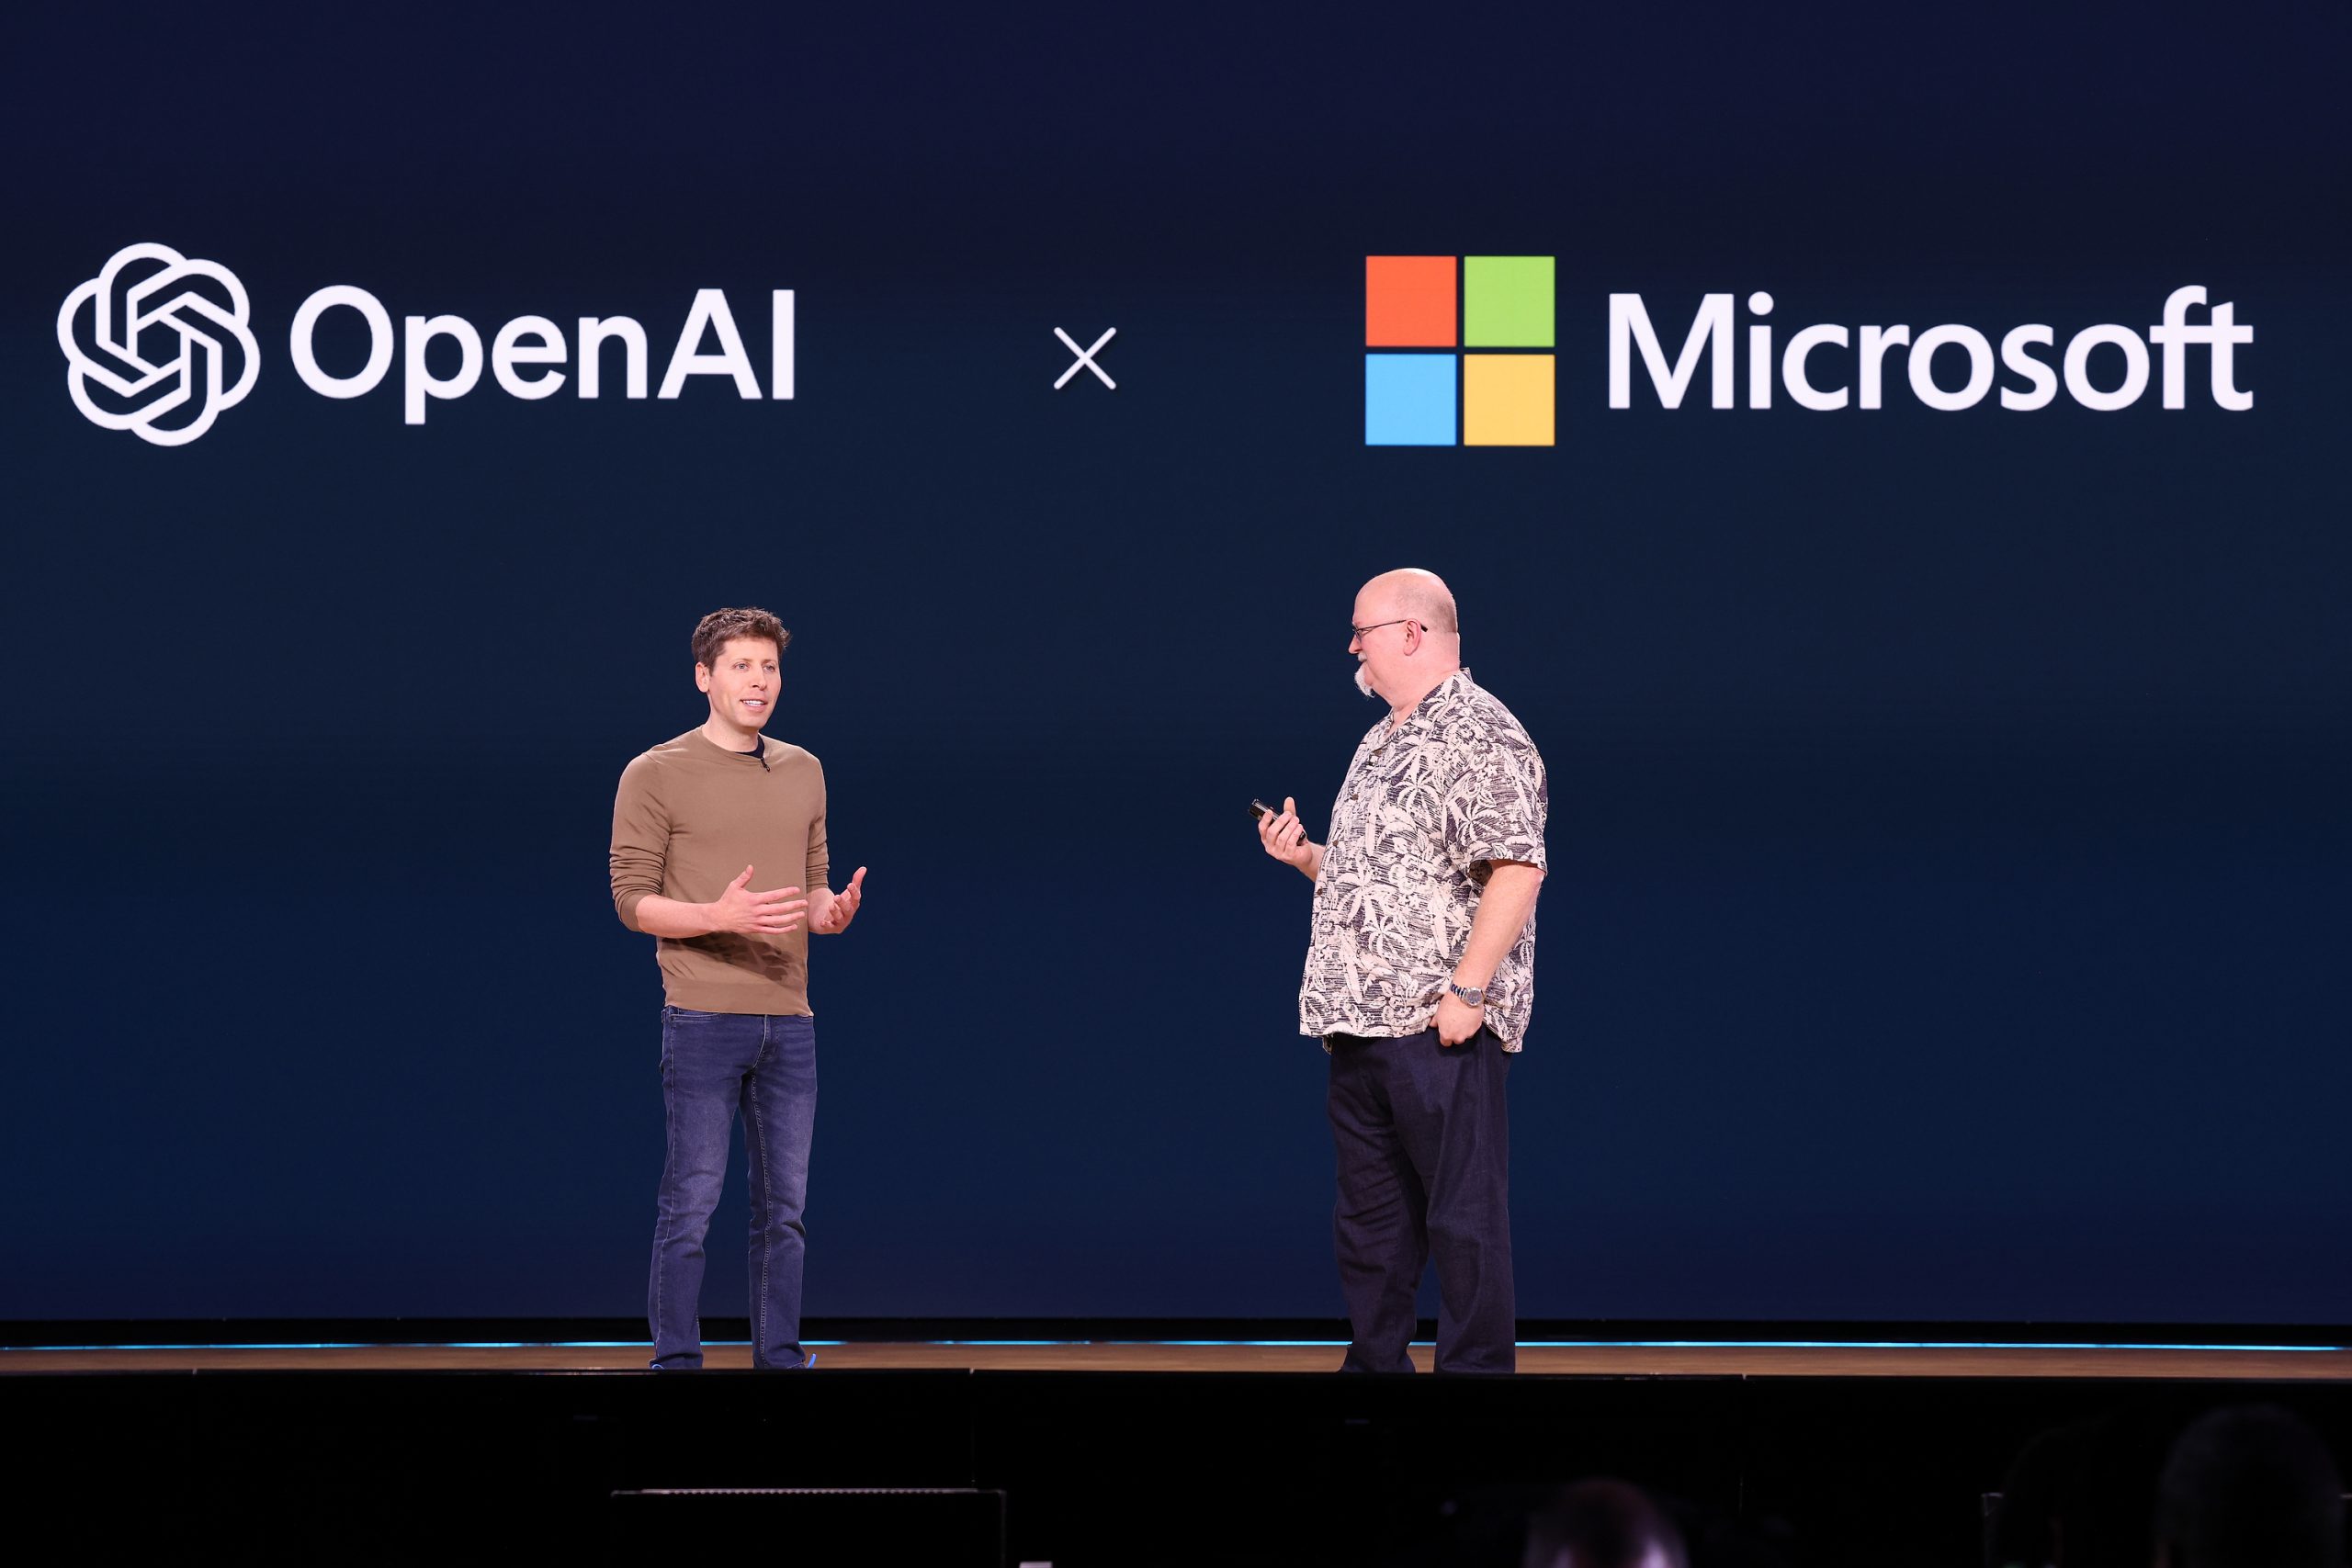 Two men standing on stage with OpenAi and Microsoft logos on a screen behind them